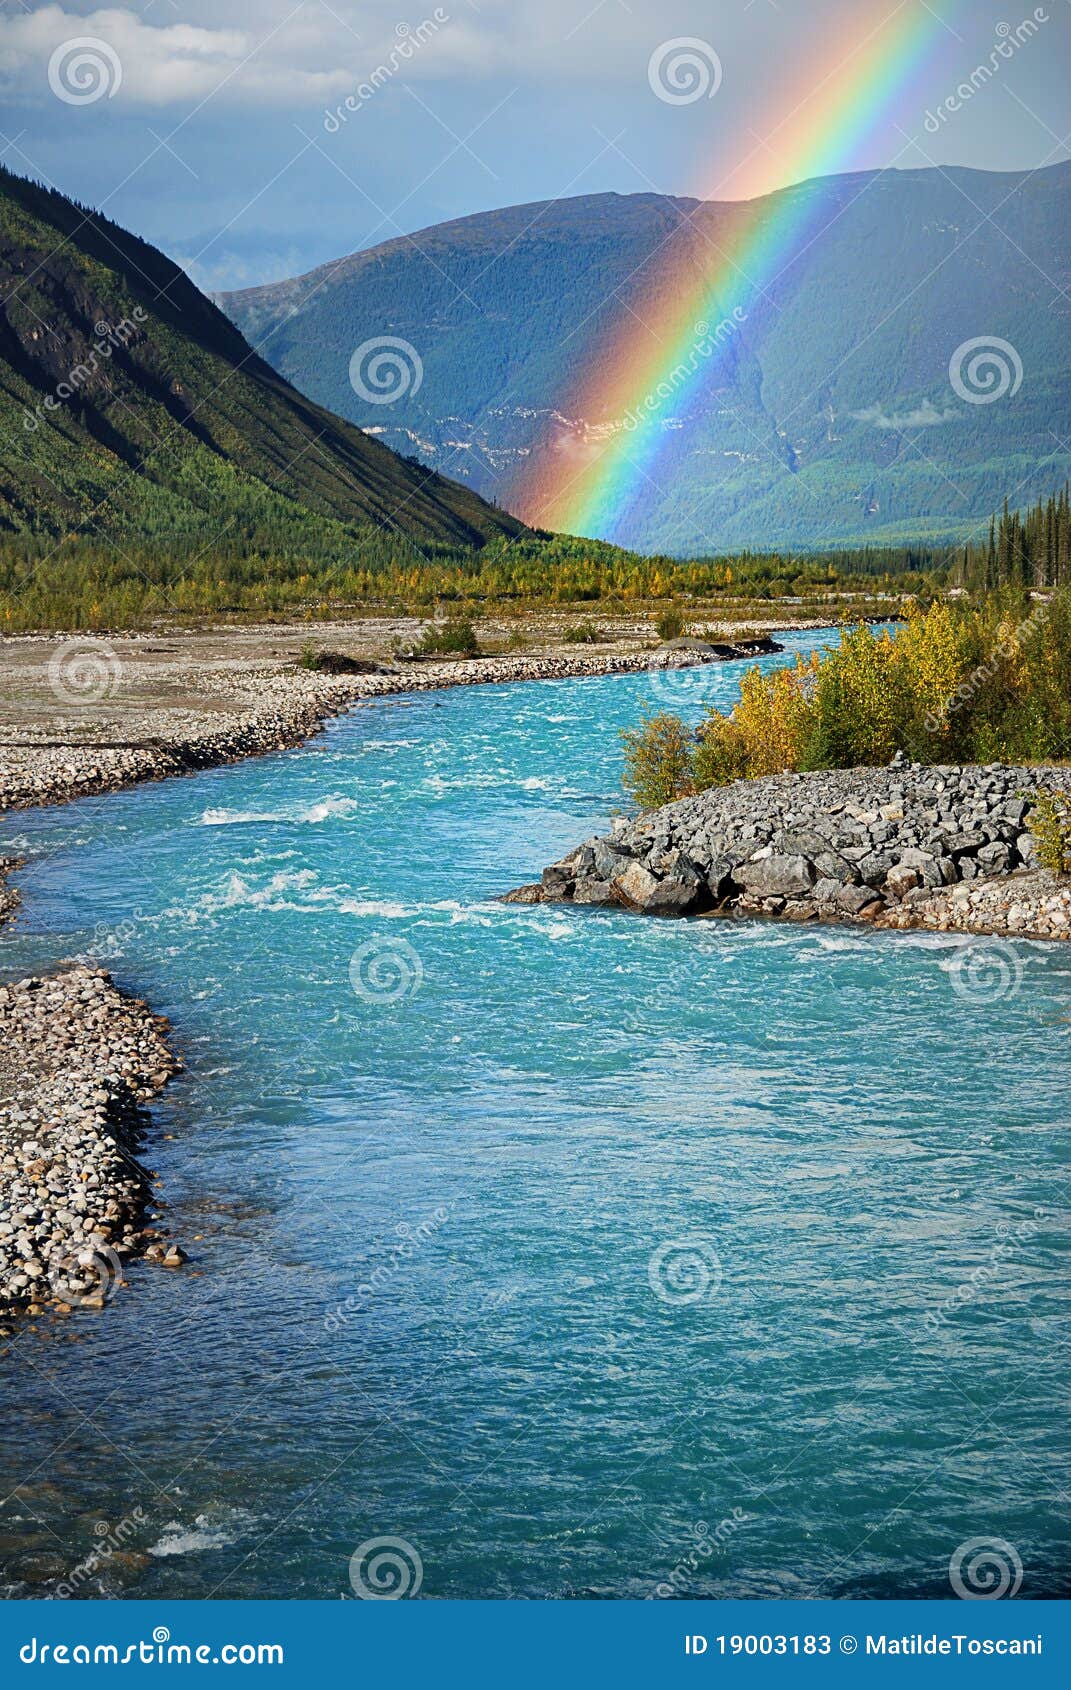 rainbow and river